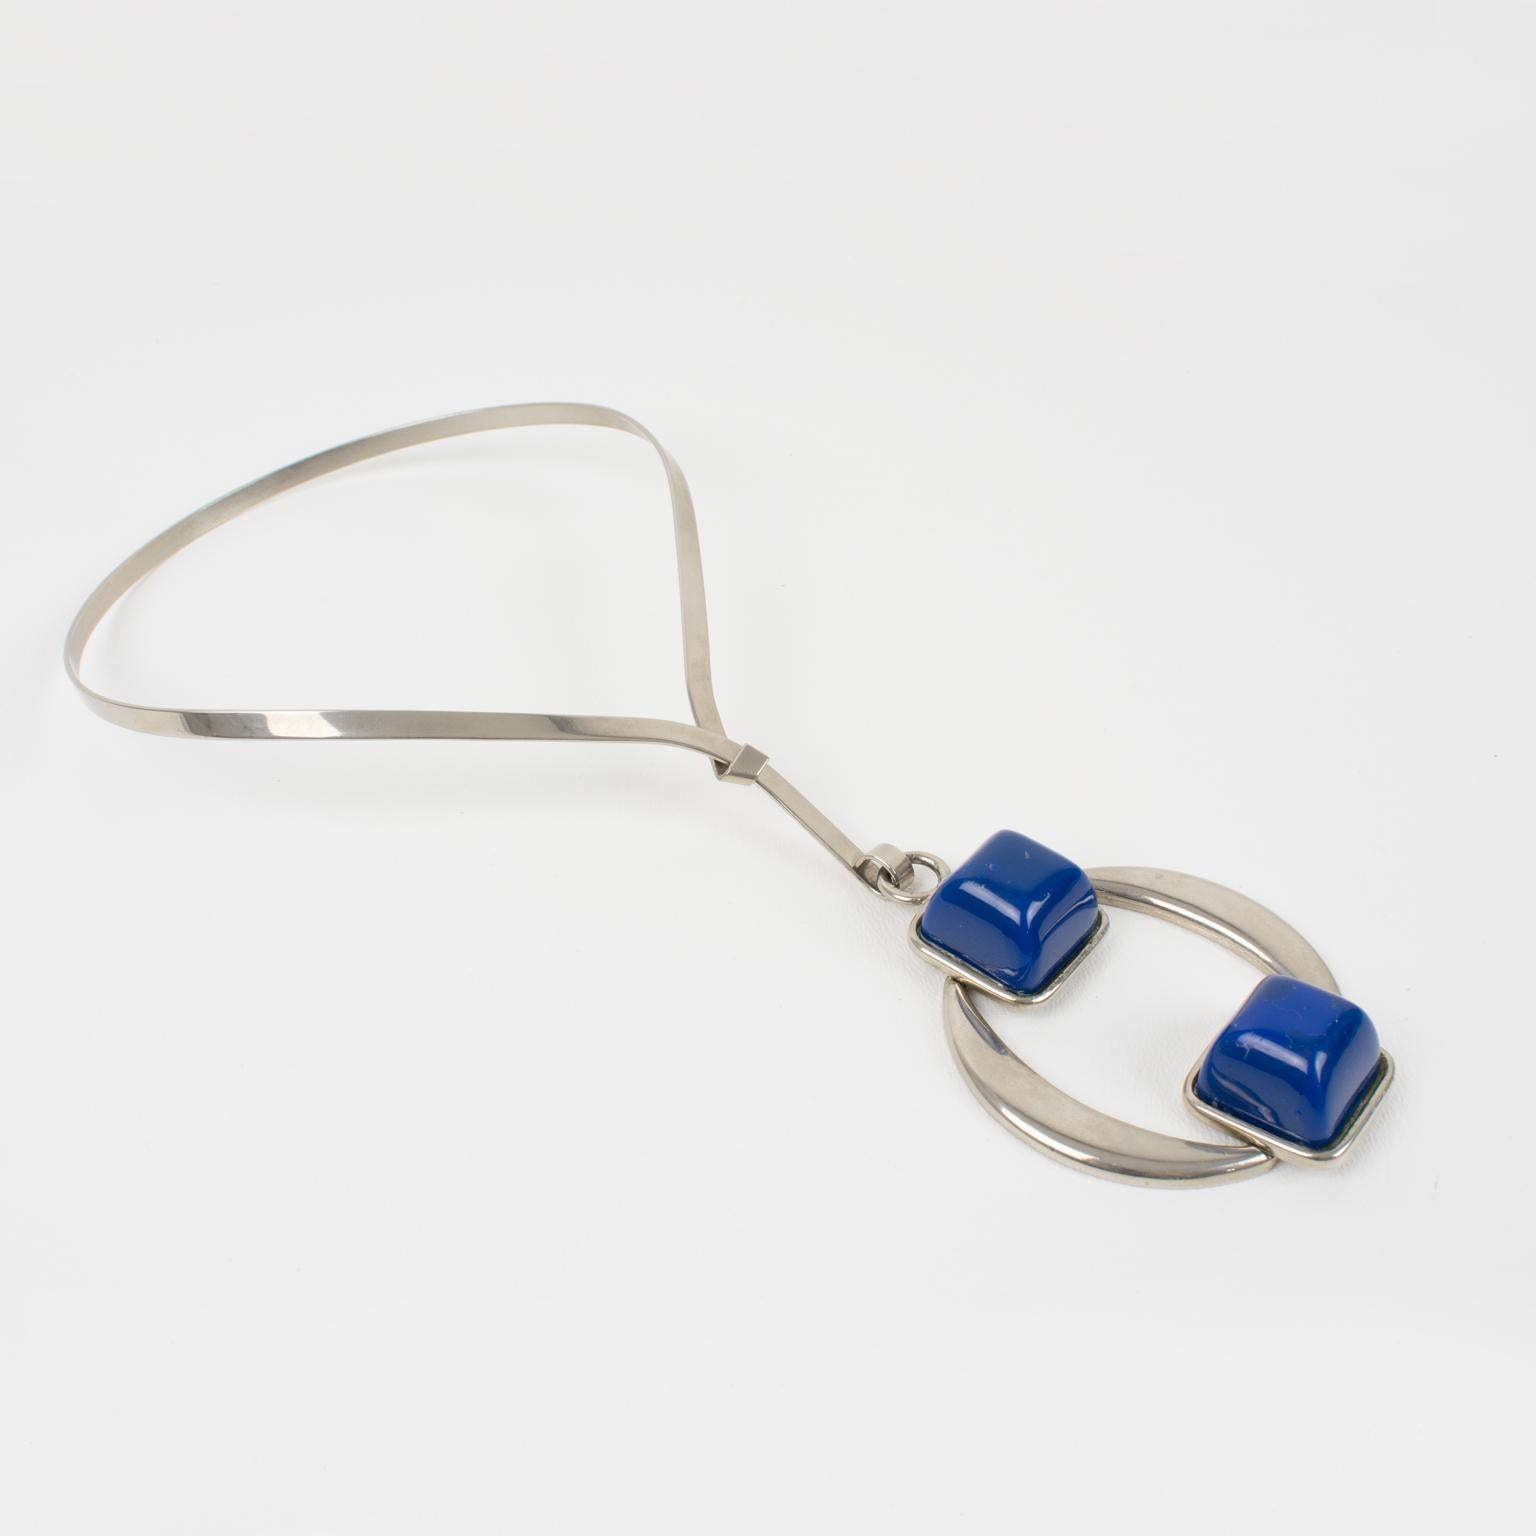 Mid Century Space Age Collar Pendant Necklace Stainless Steel and Blue Resin In Excellent Condition For Sale In Atlanta, GA